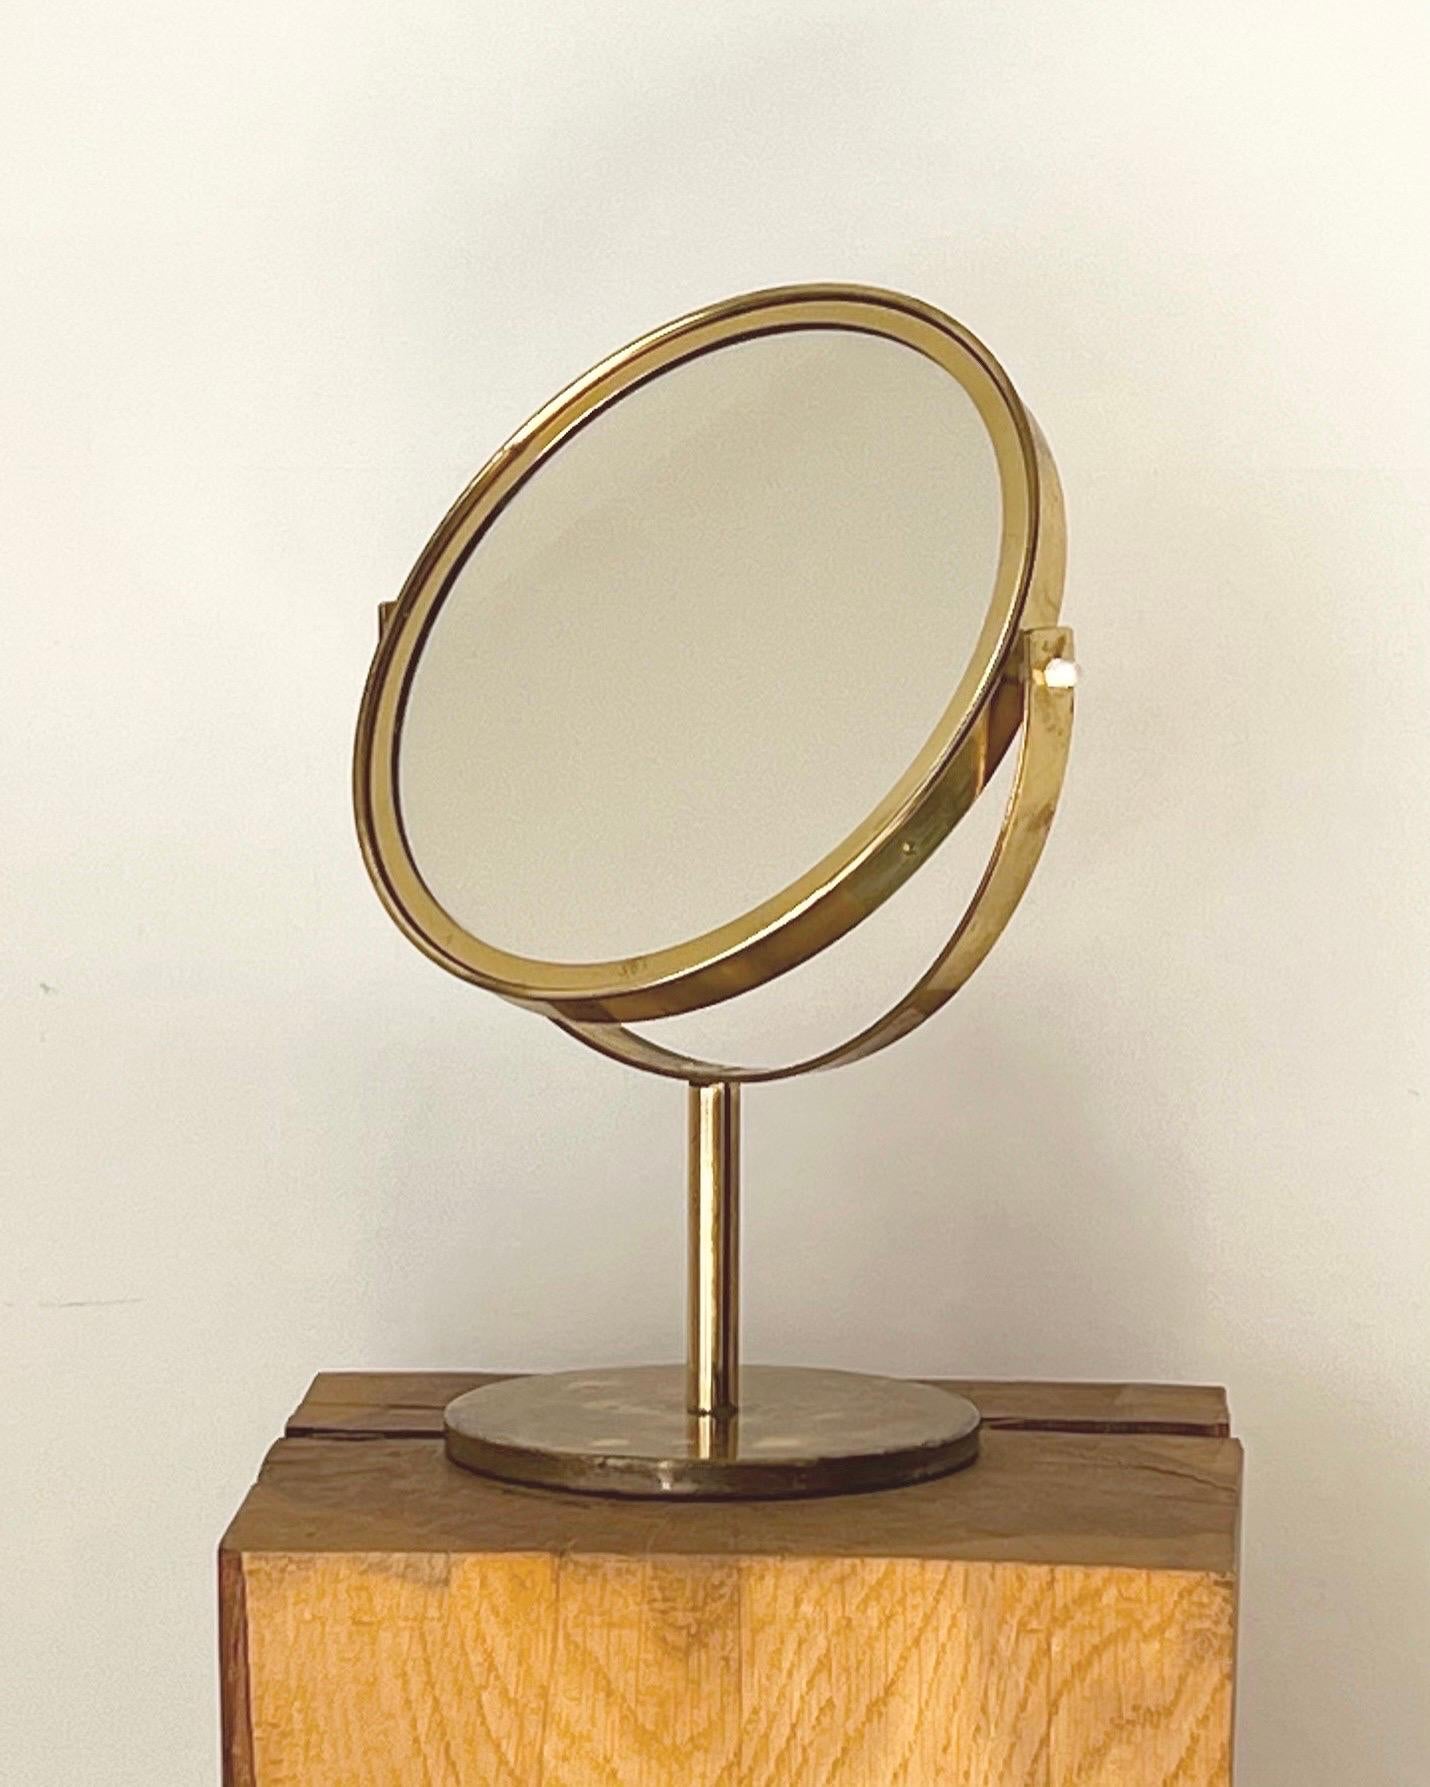 A double-sided brass table mirror by Hans Agne-Jakobsson, Mid-20th century, Sweden. Full size reflecting mirror to one side, and smaller magnifying mirror the to the reverse. The mirror turns left/right through the stem and the tilt can be adjusted